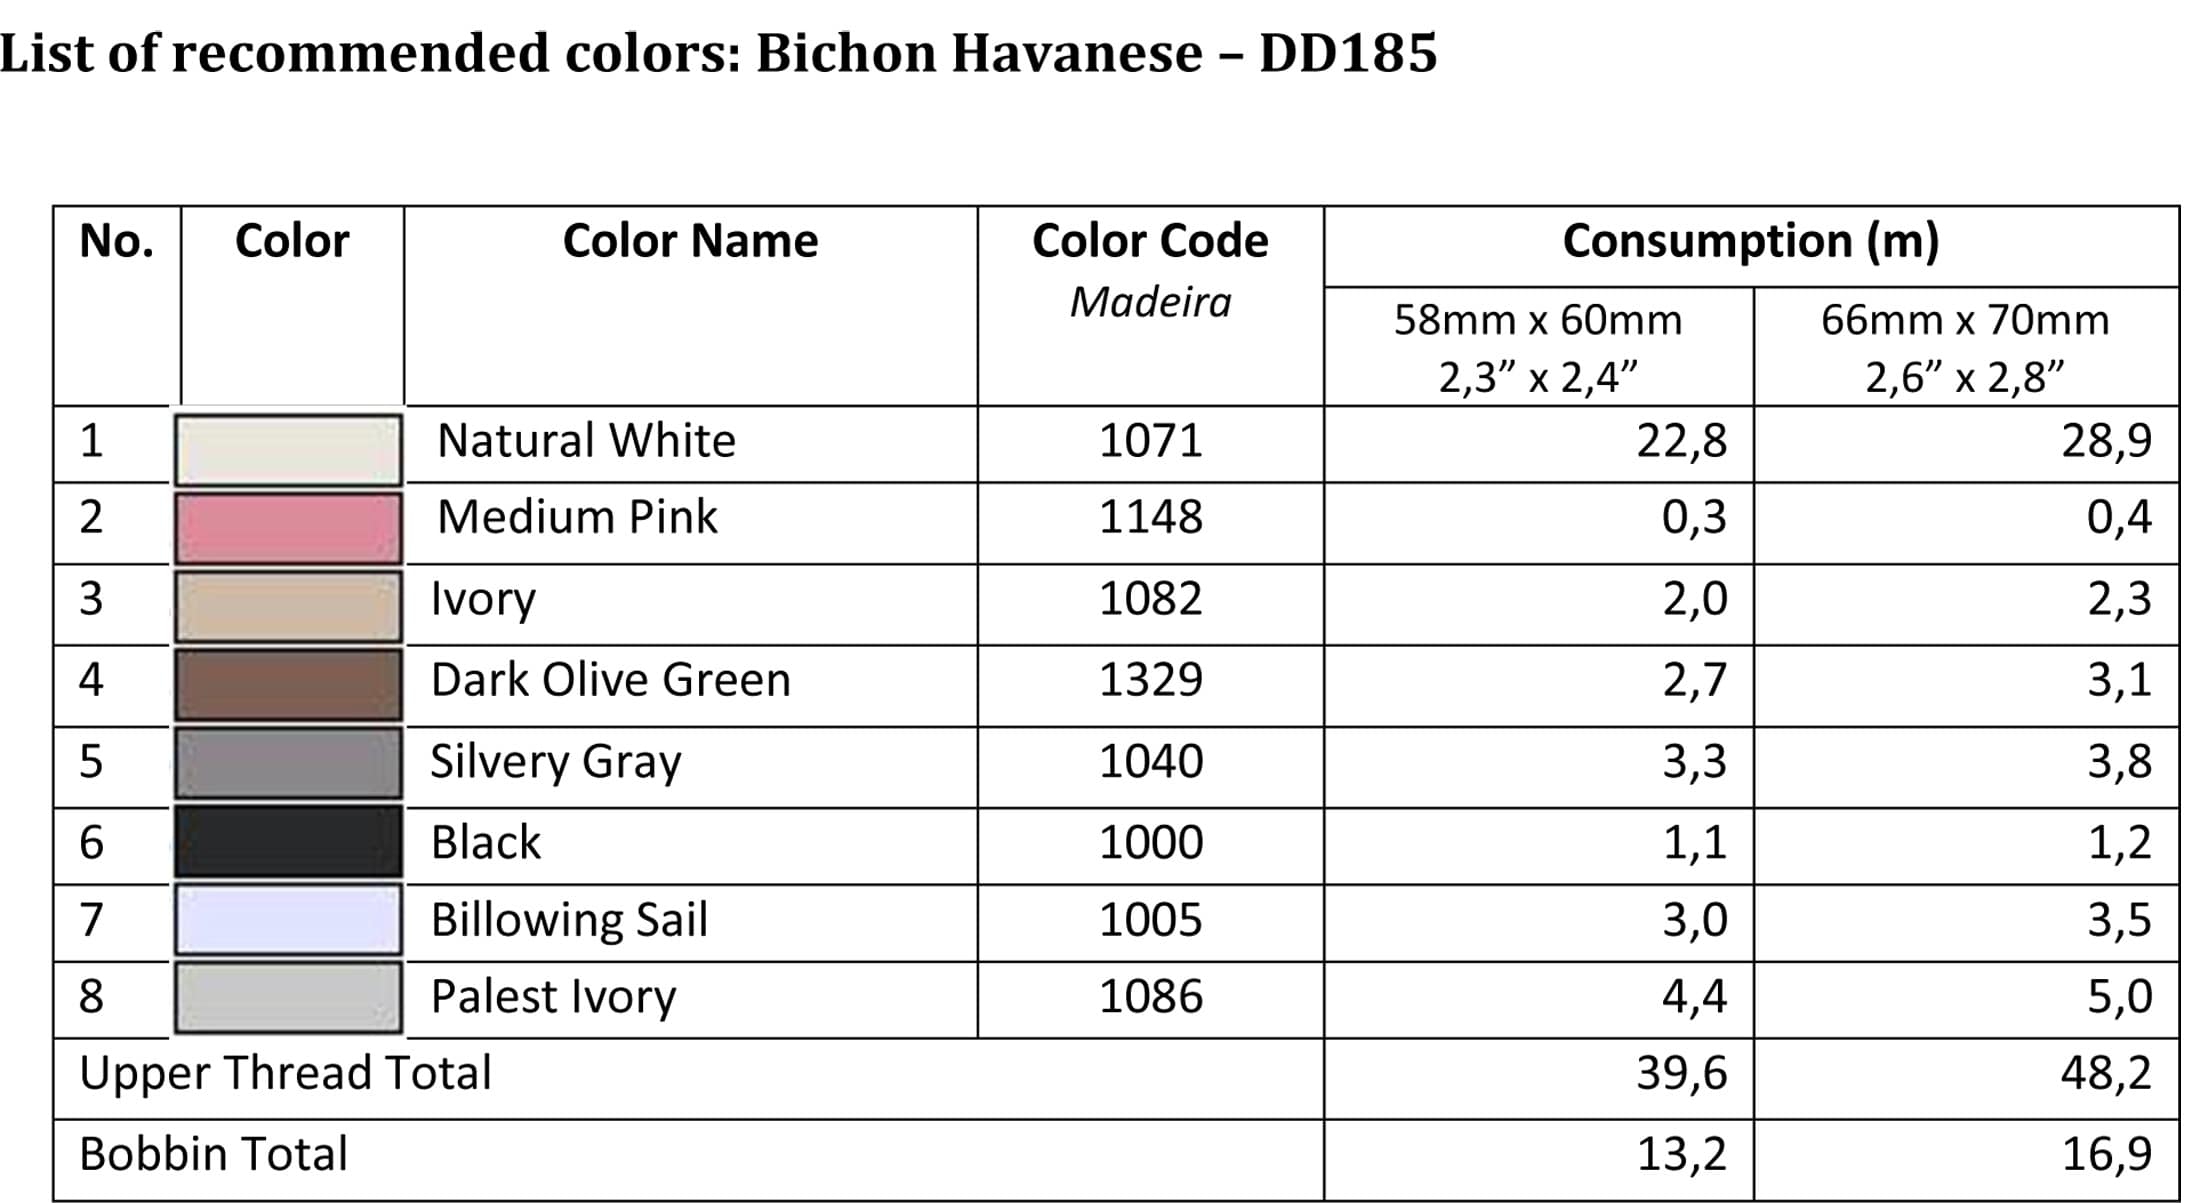 List of recommended colors - DD185